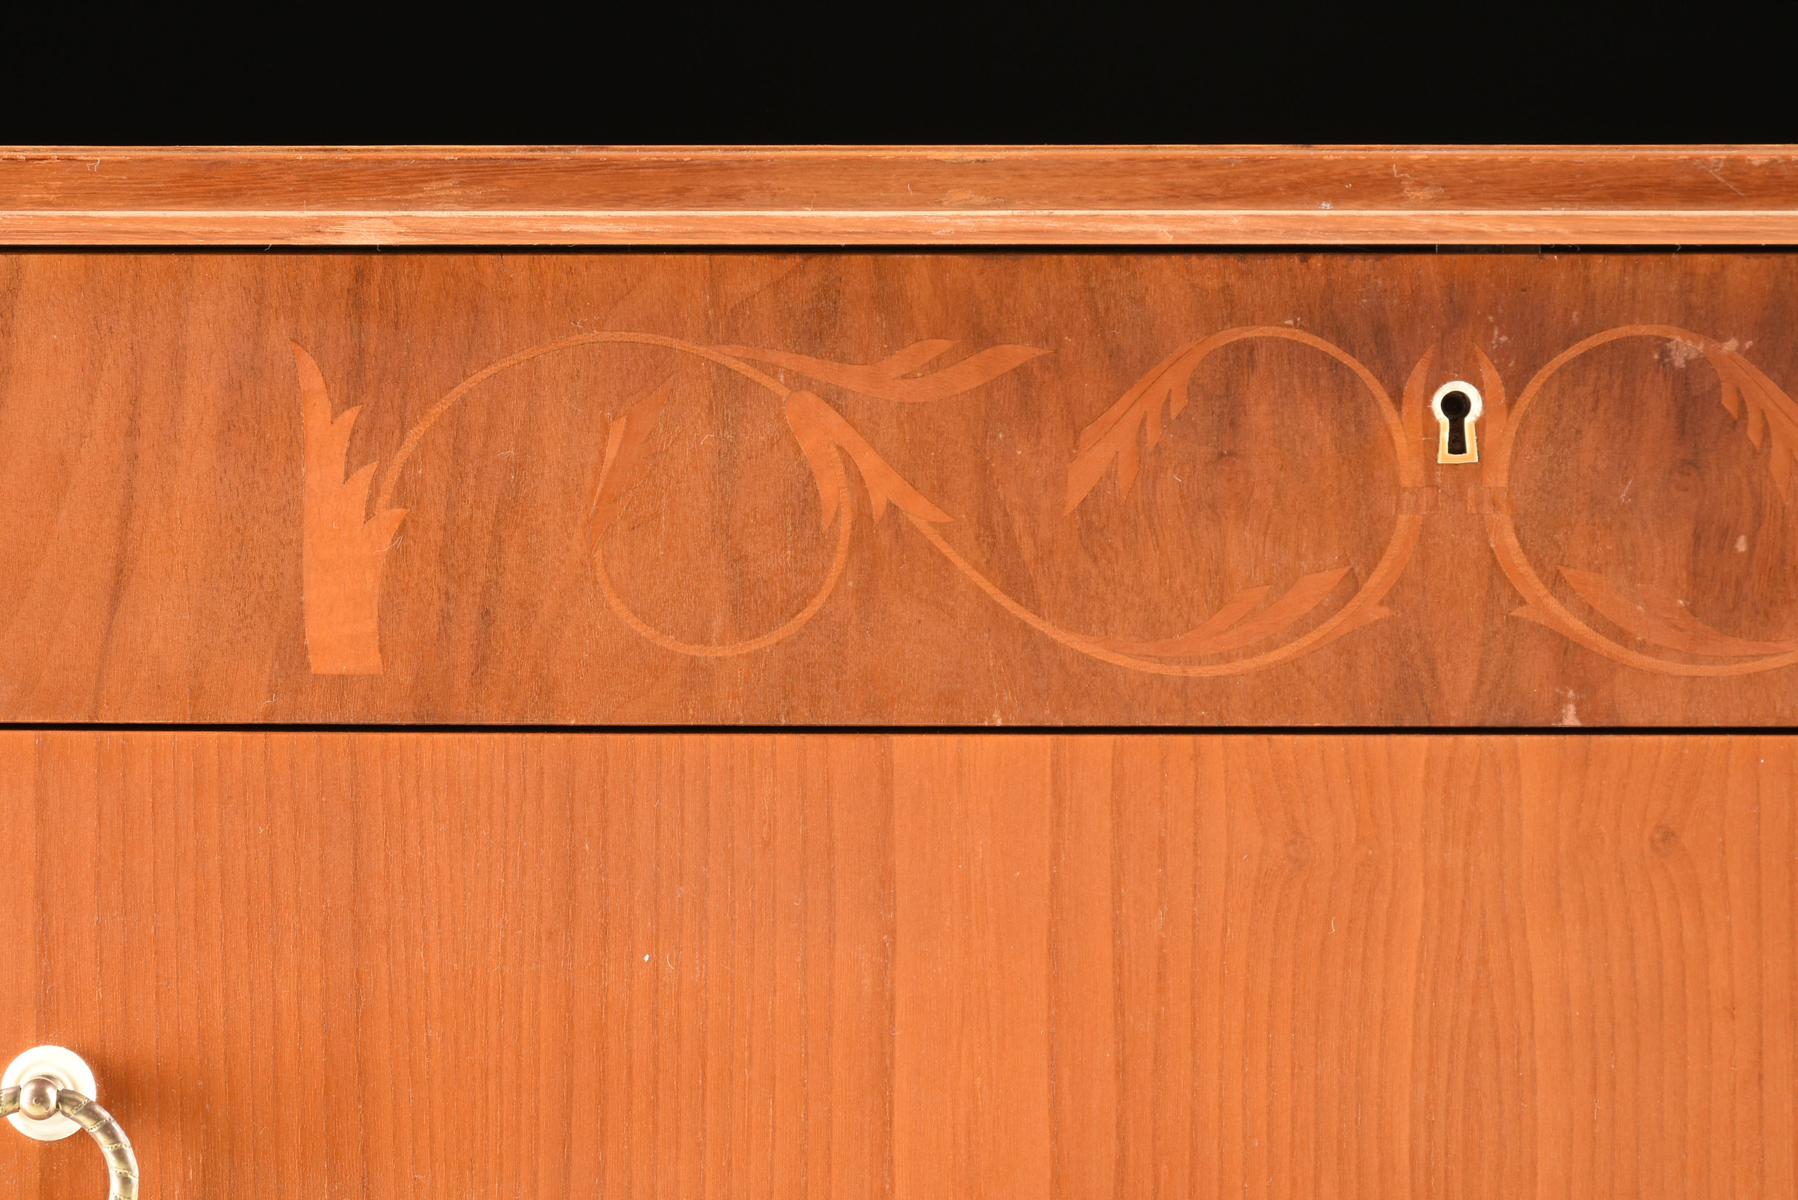 A MID-CENTURY MODERN MARQUETRY INLAID BIRCH CHEST OF DRAWERS, POSSIBLY SCANDINAVIAN, SIGNED, 1951, - Image 3 of 8